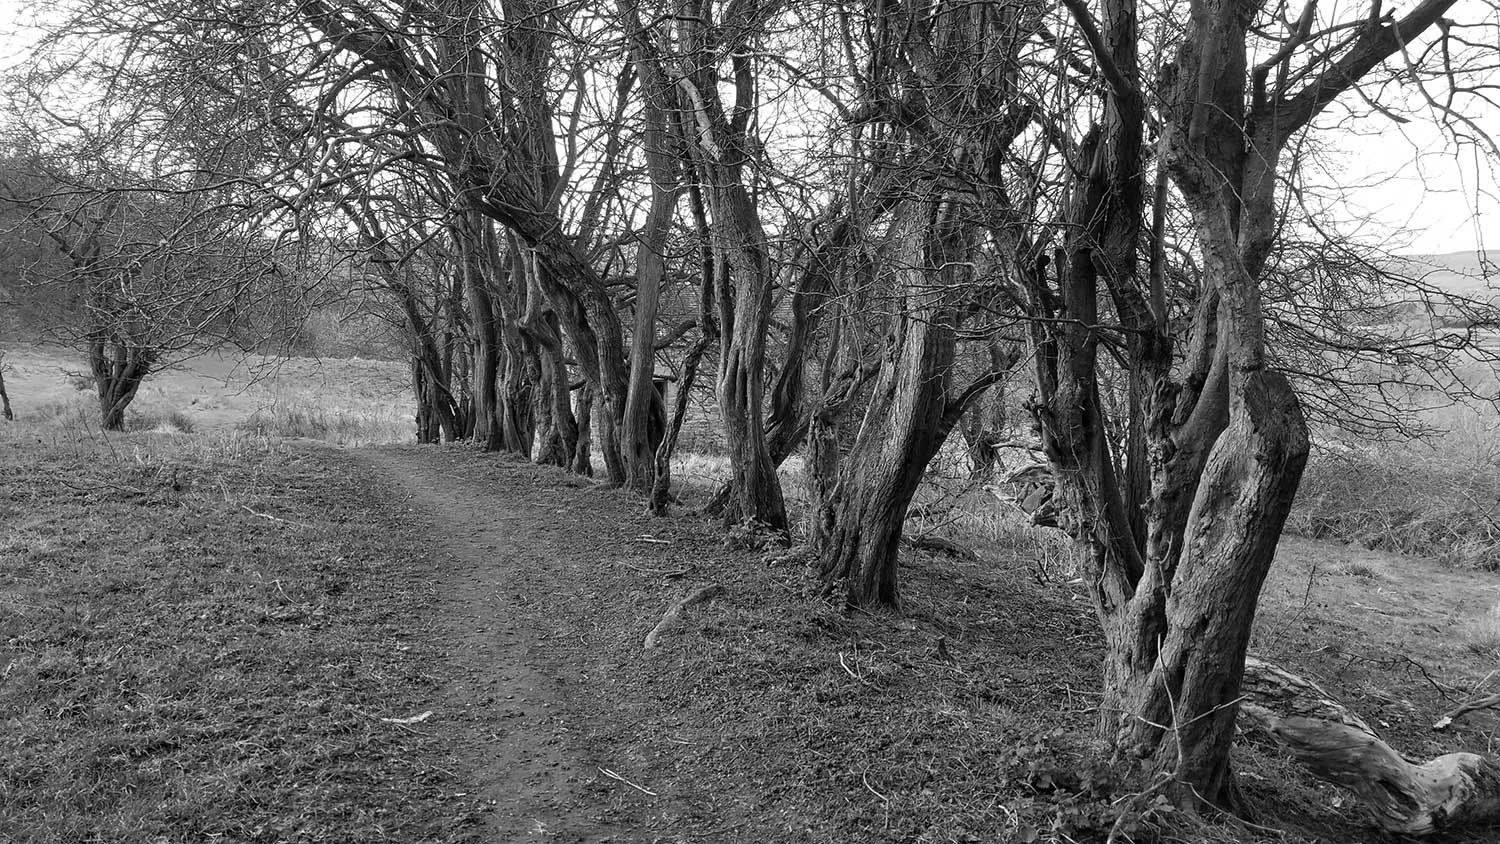 A black and white photo of a row of bare trees at the edge of a field